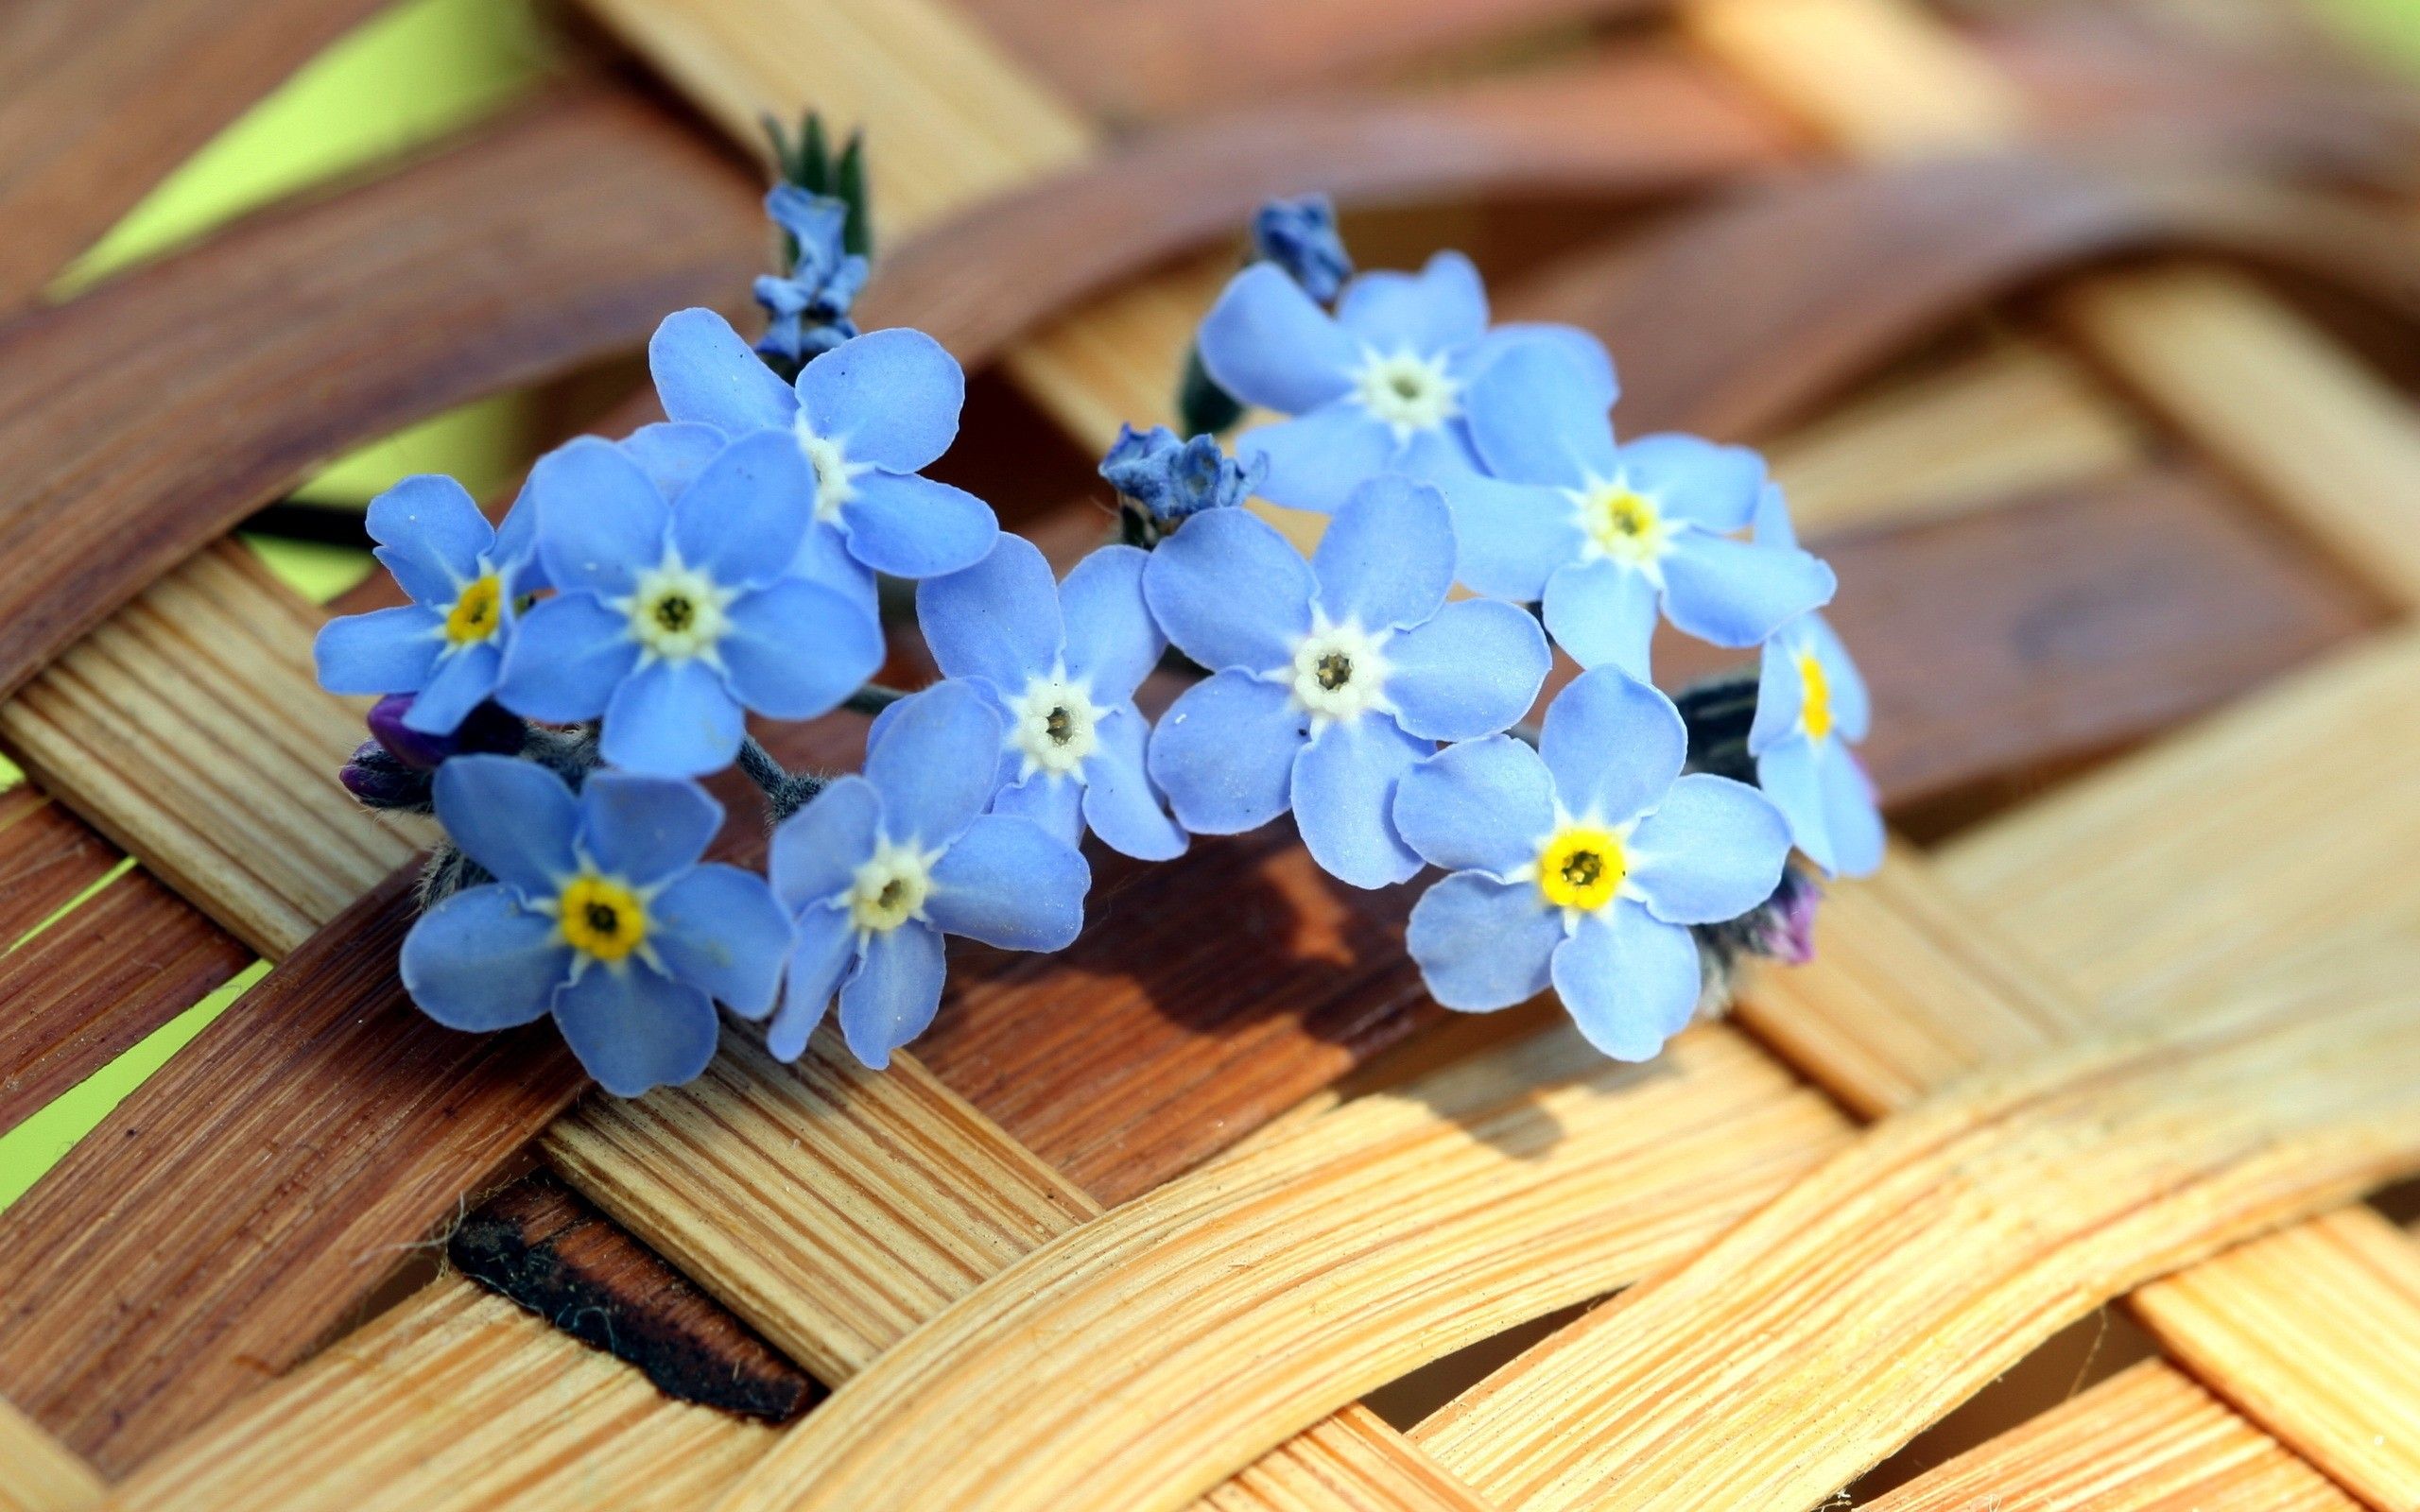 Blue Forget Me Not Flowers Wallpaper. Blue Forget Me Not Flowers